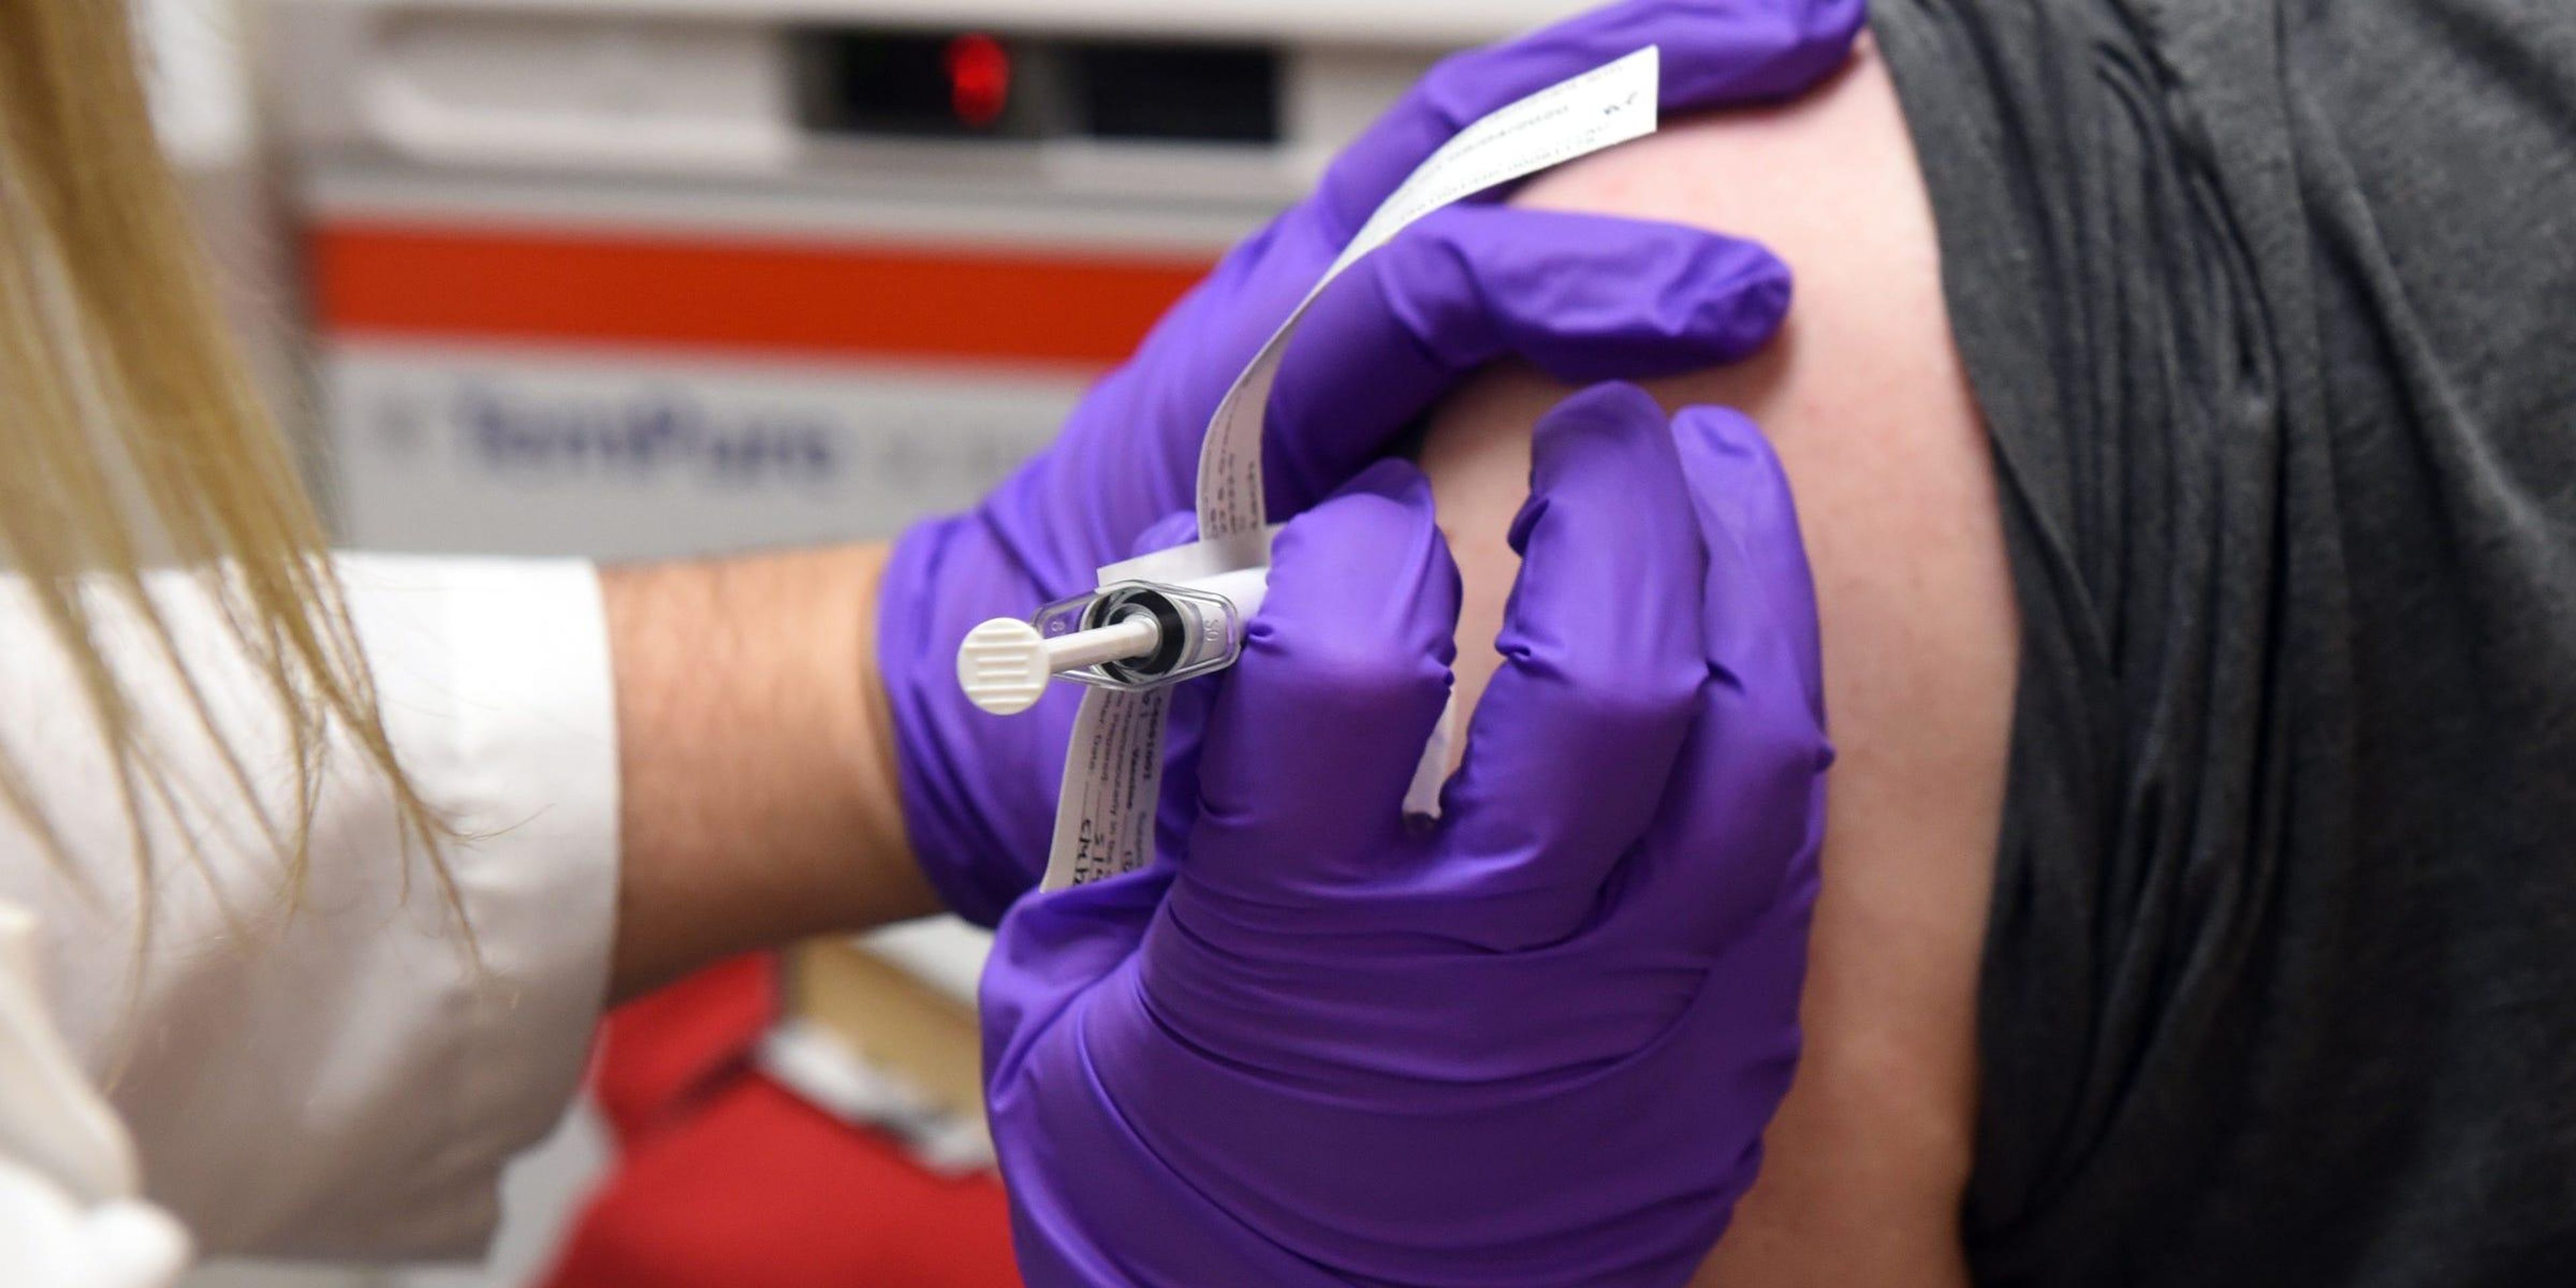 A volunteer receives an experimental coronavirus vaccination in a clinical trial at the University of Maryland's medical school.